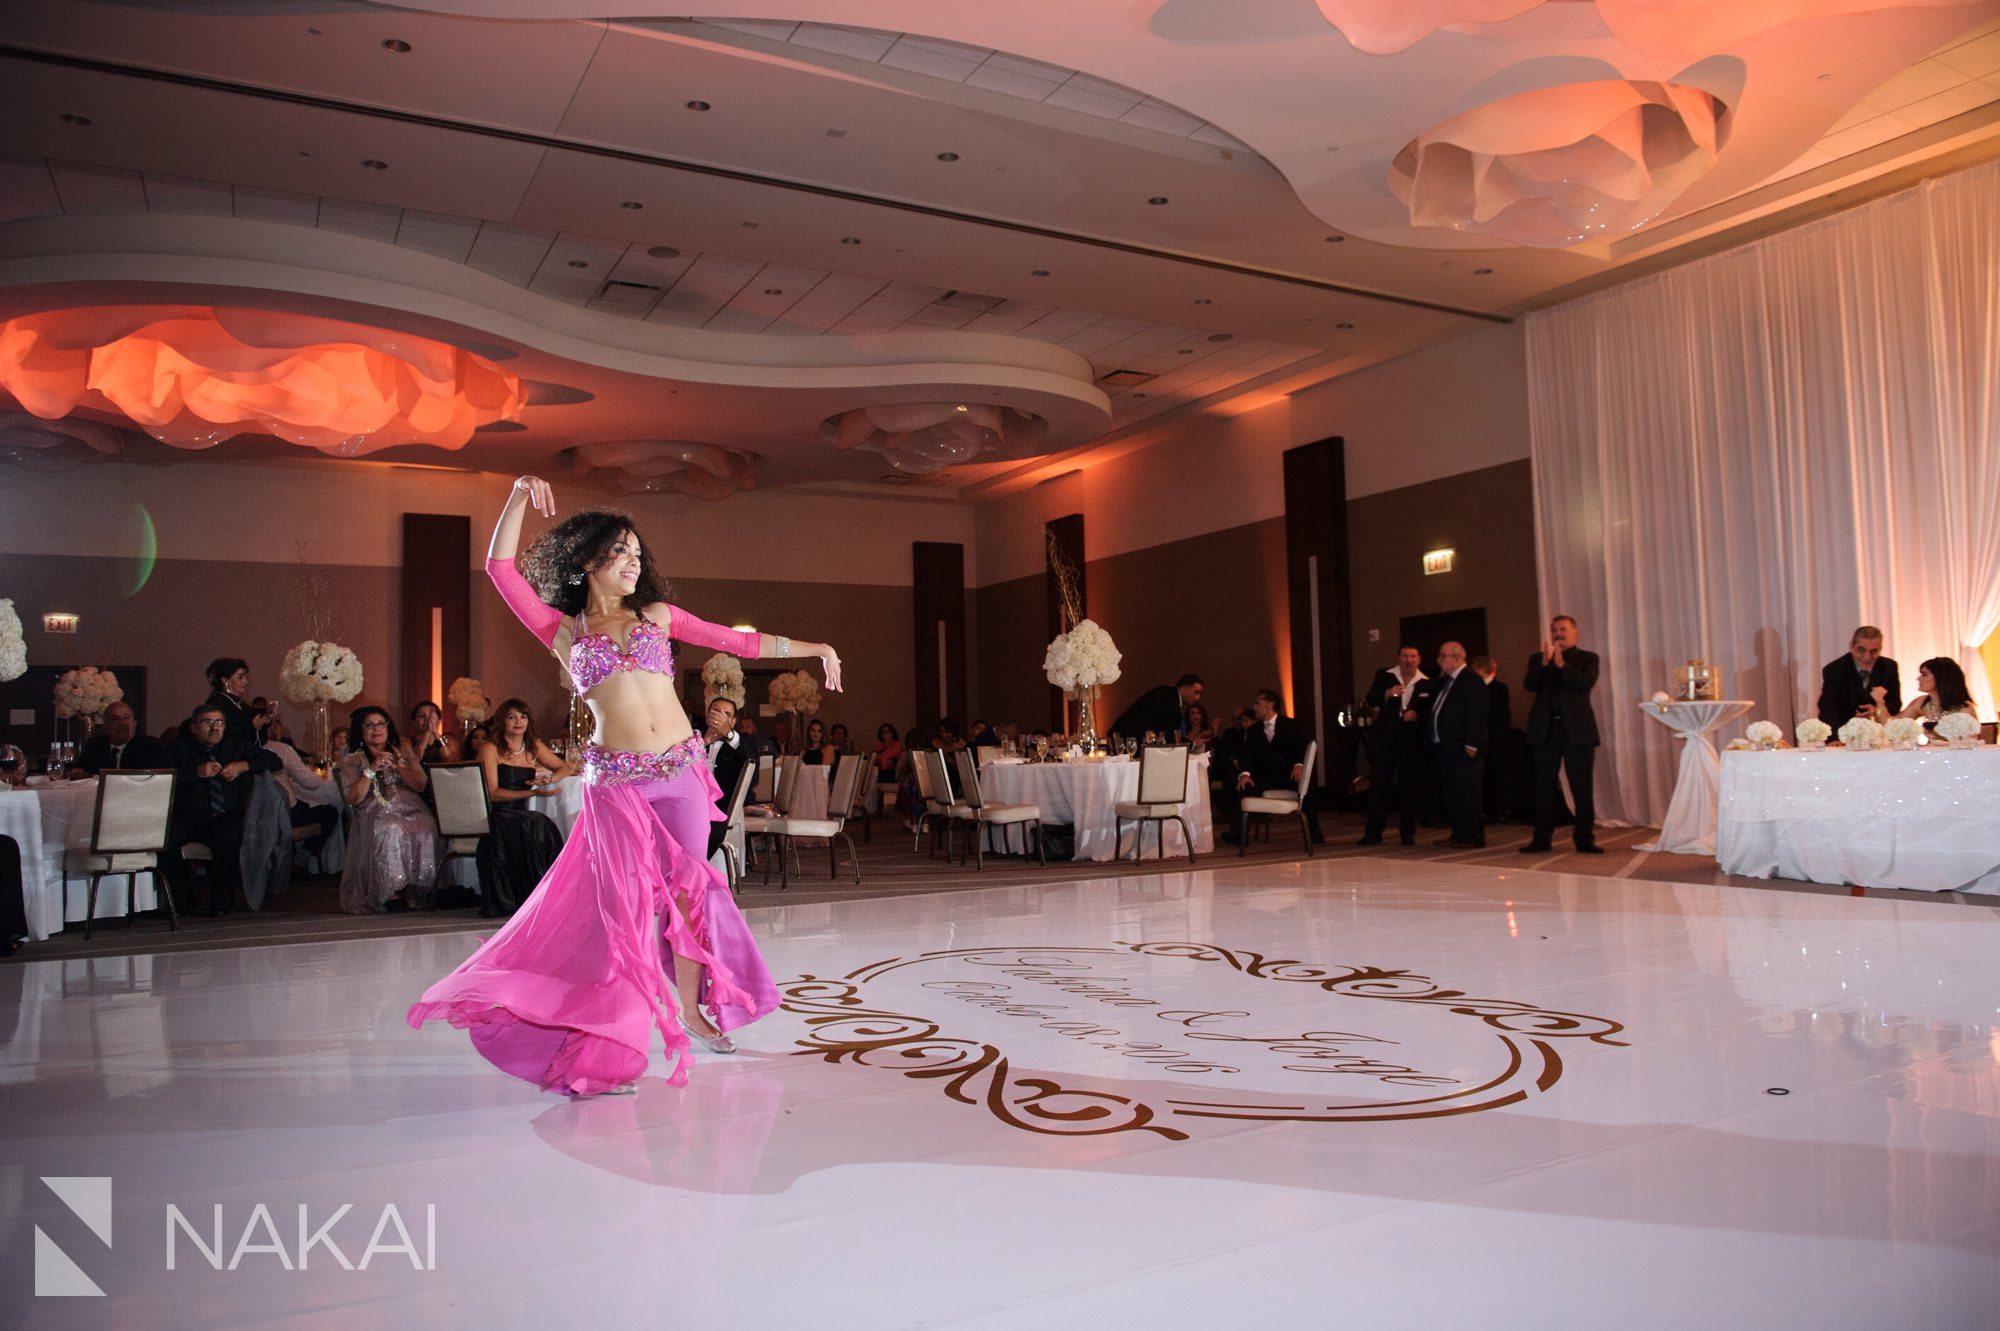 loews chicago ohare wedding reception picture belly dancers assyrian